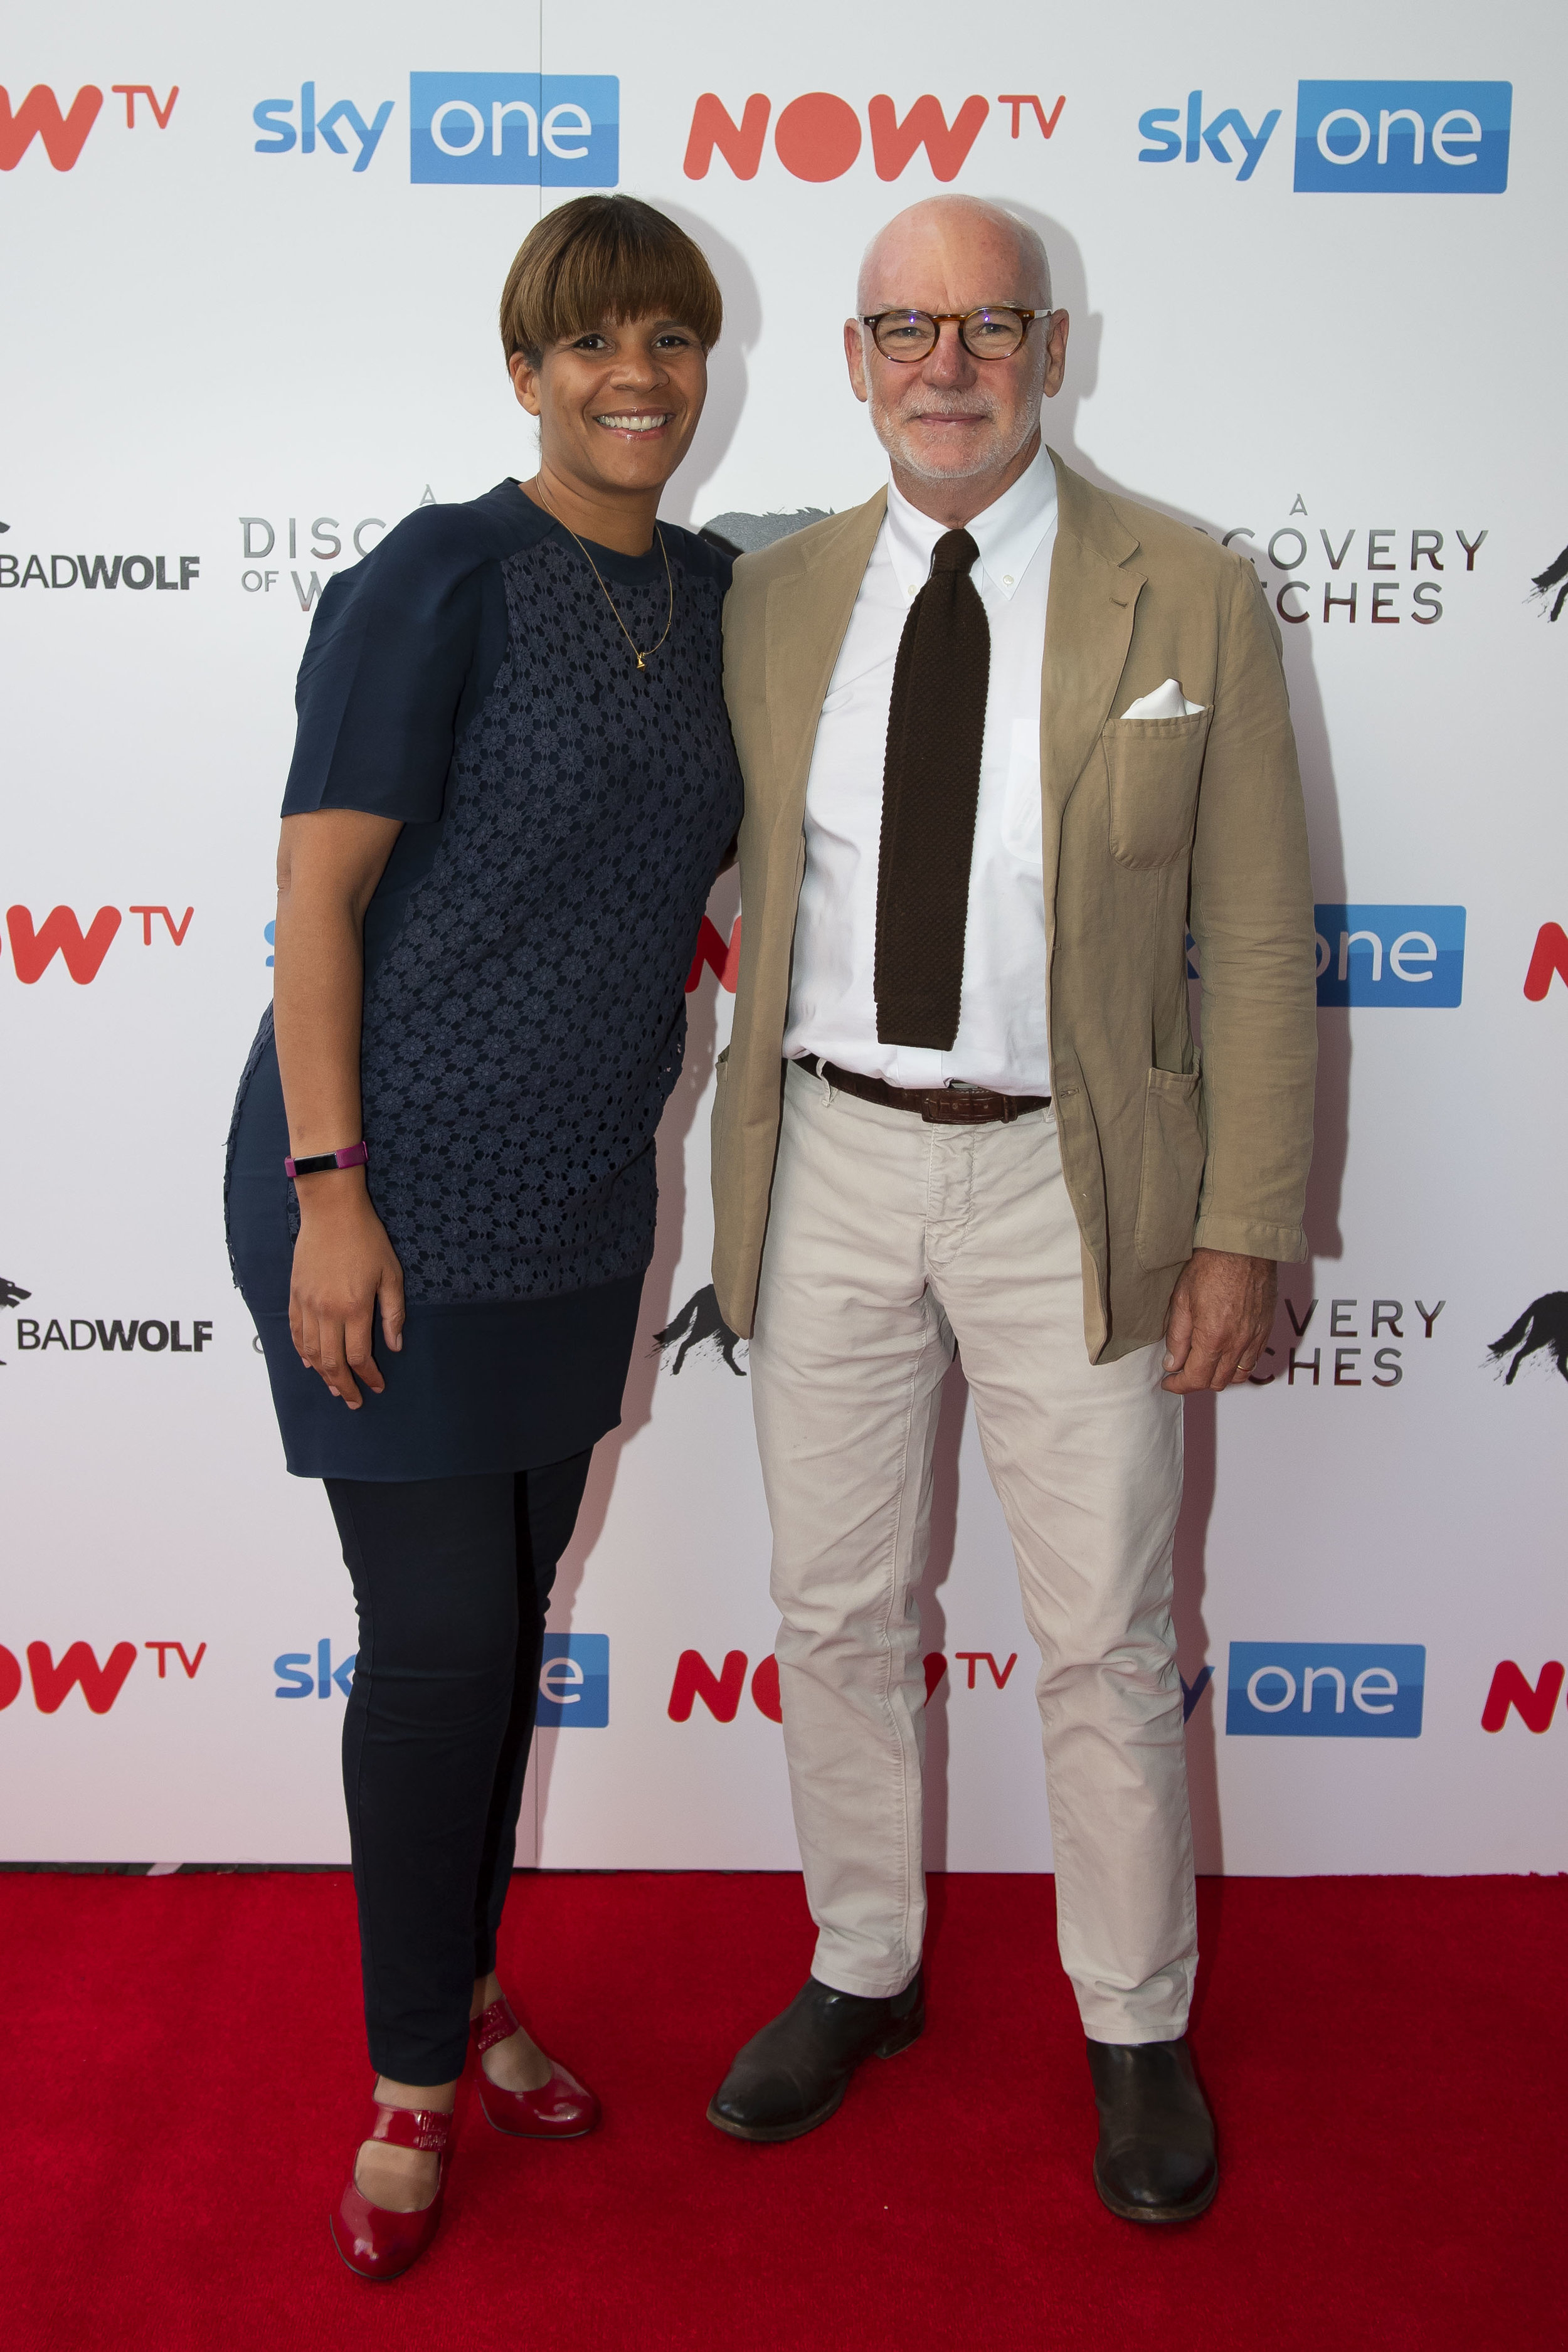  CARDIFF, WALES - SEPTEMBER 05: Anne Mensah, head of drama at Sky, and Gary Davey, managing director of Sky content, attend the UK Premiere of 'A Discovery Of Witches' at Cineworld on September 5, 2018 in Cardiff, Wales. (Photo by Matthew Horwood/Get